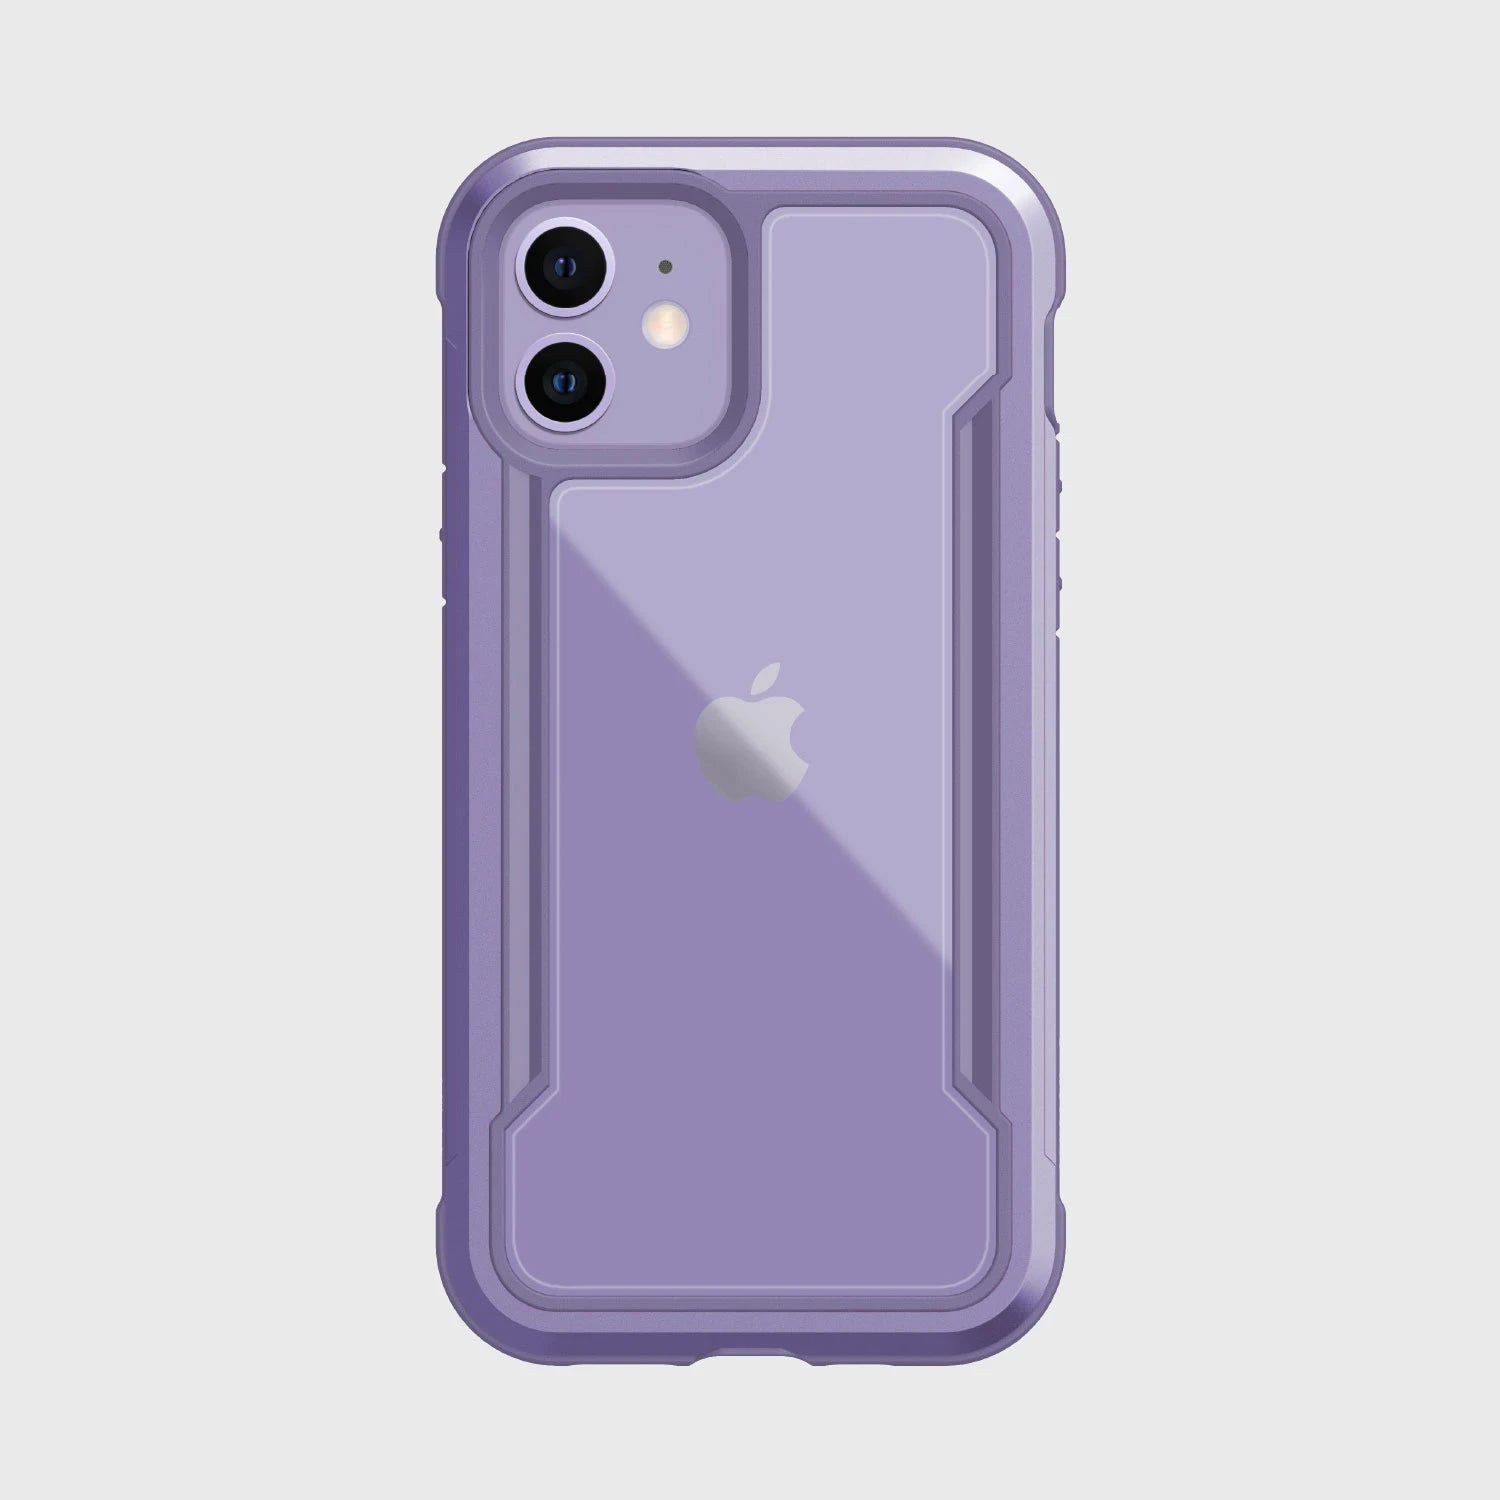 A purple Raptic iPhone 12 & iPhone 12 Pro SHIELD case on a white background.